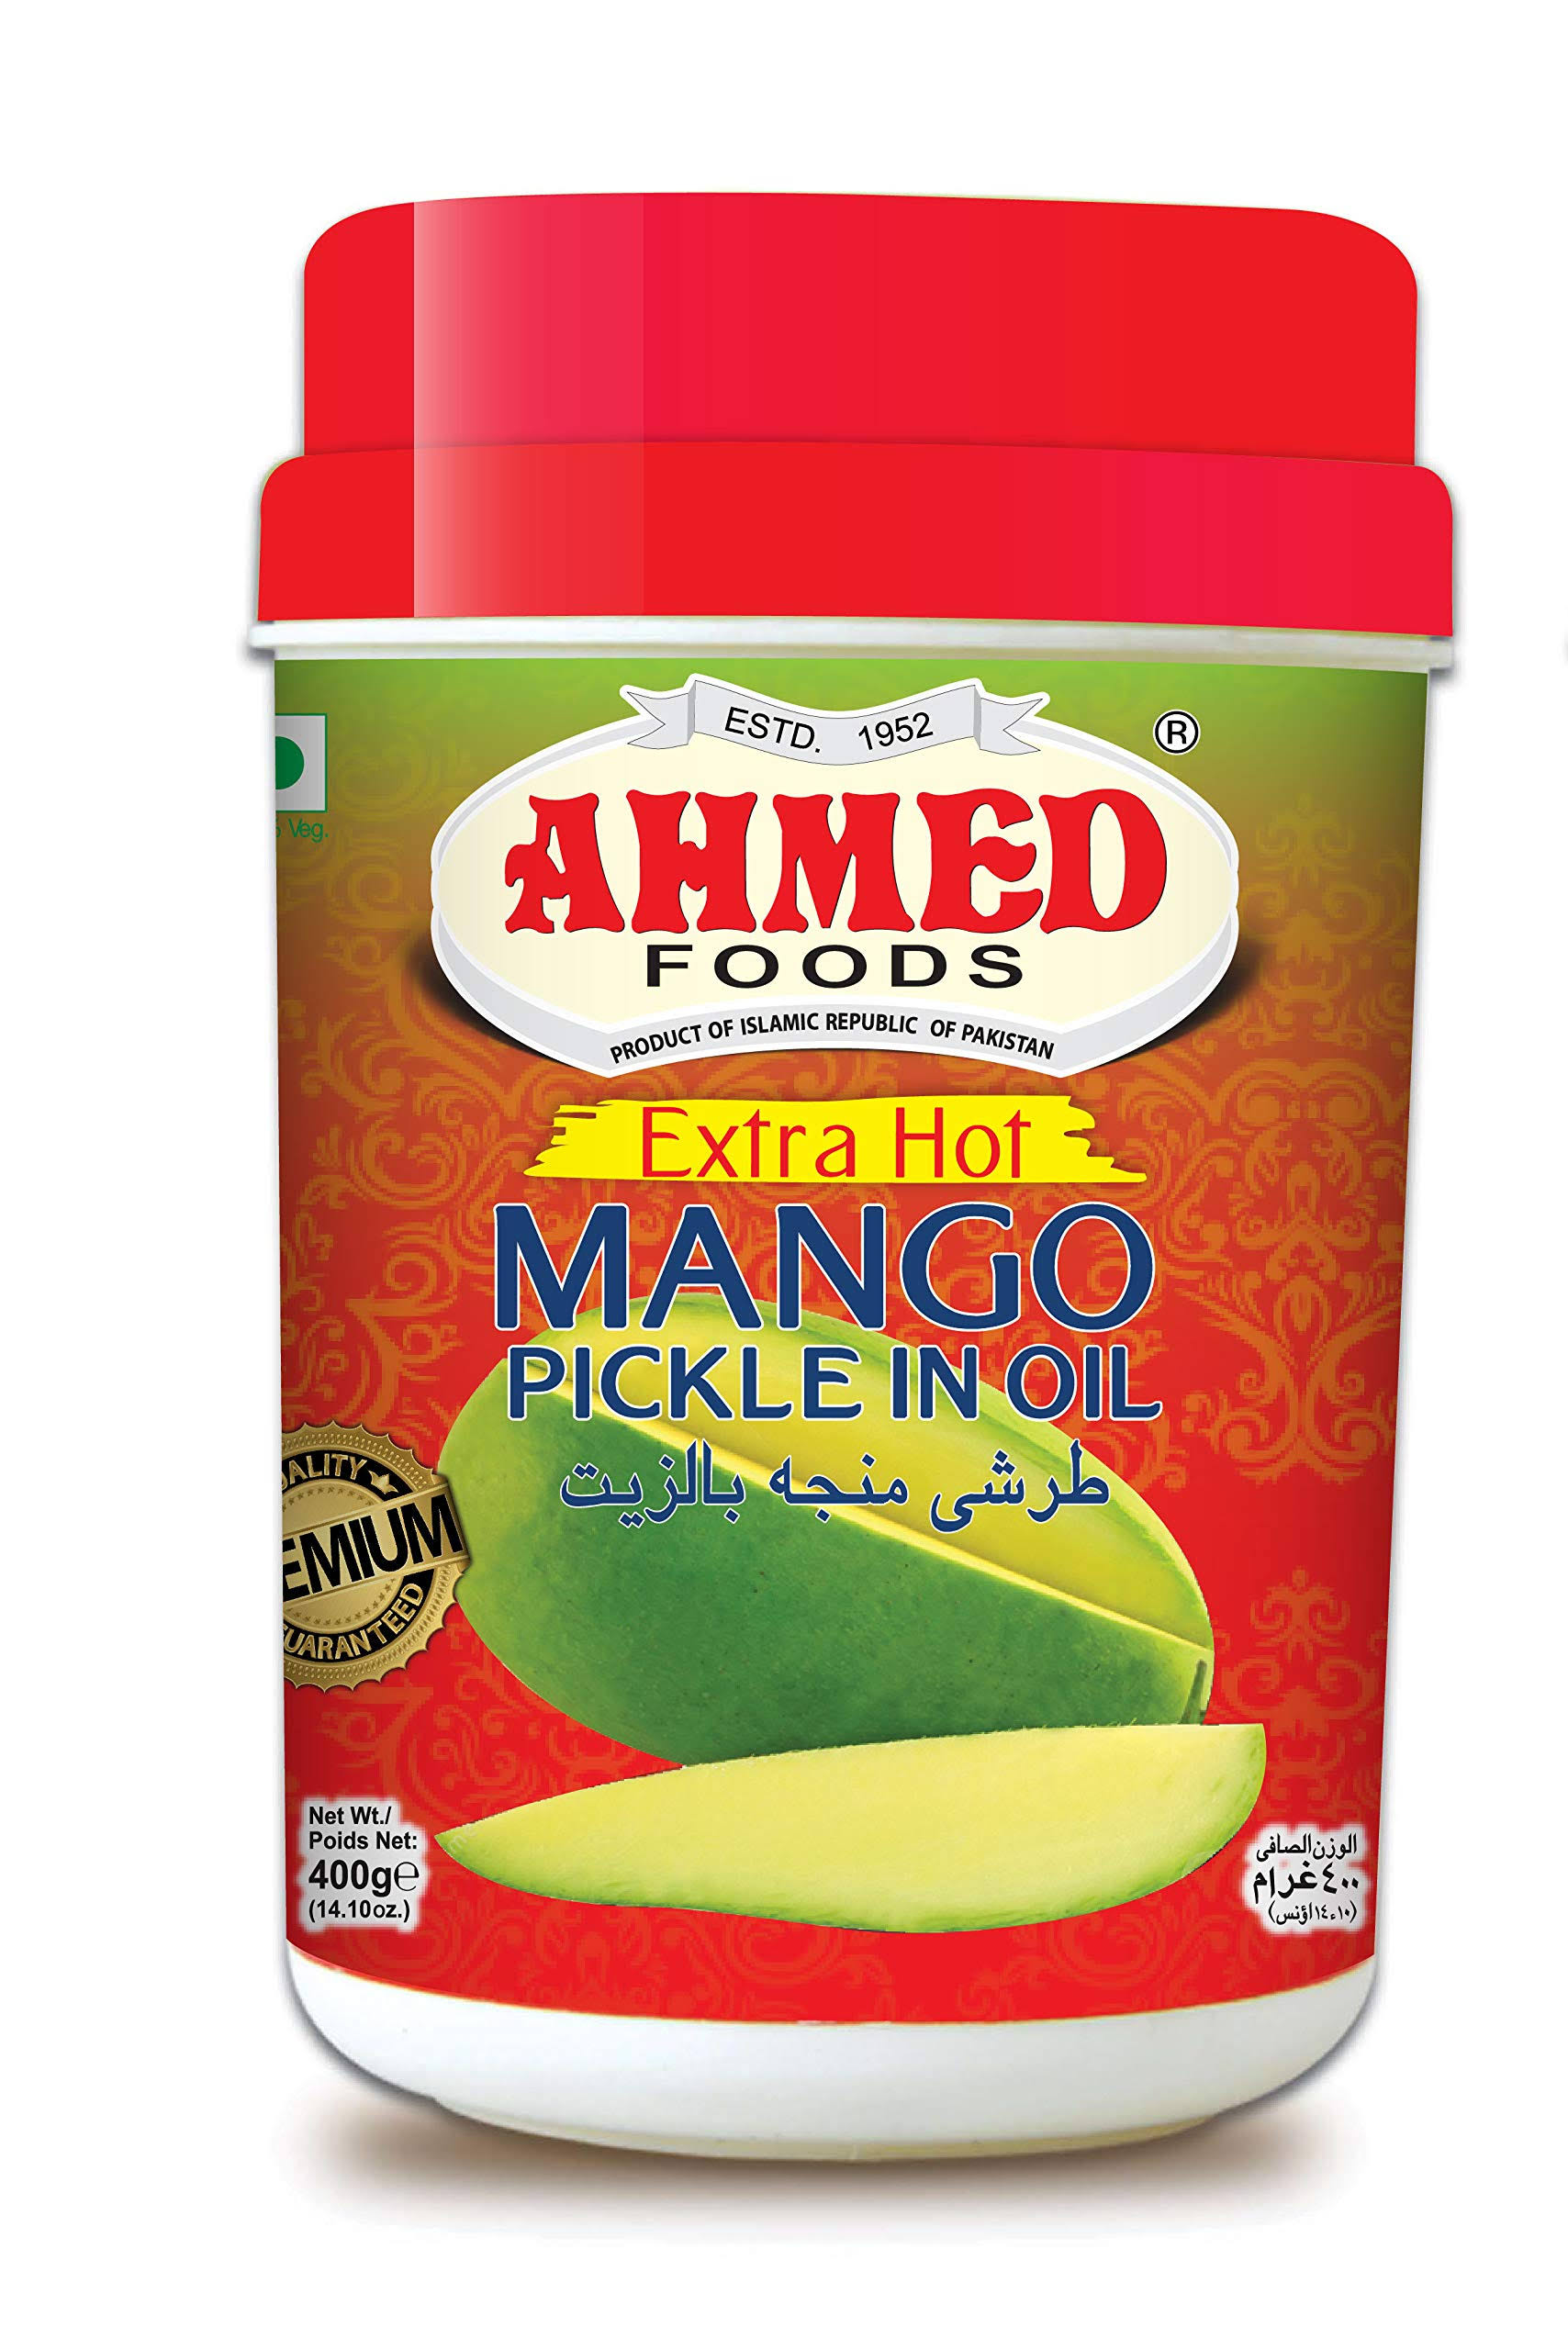 Ahmed Foods Extra Hot Mango Pickle | Groceries Online | SaveCo Online